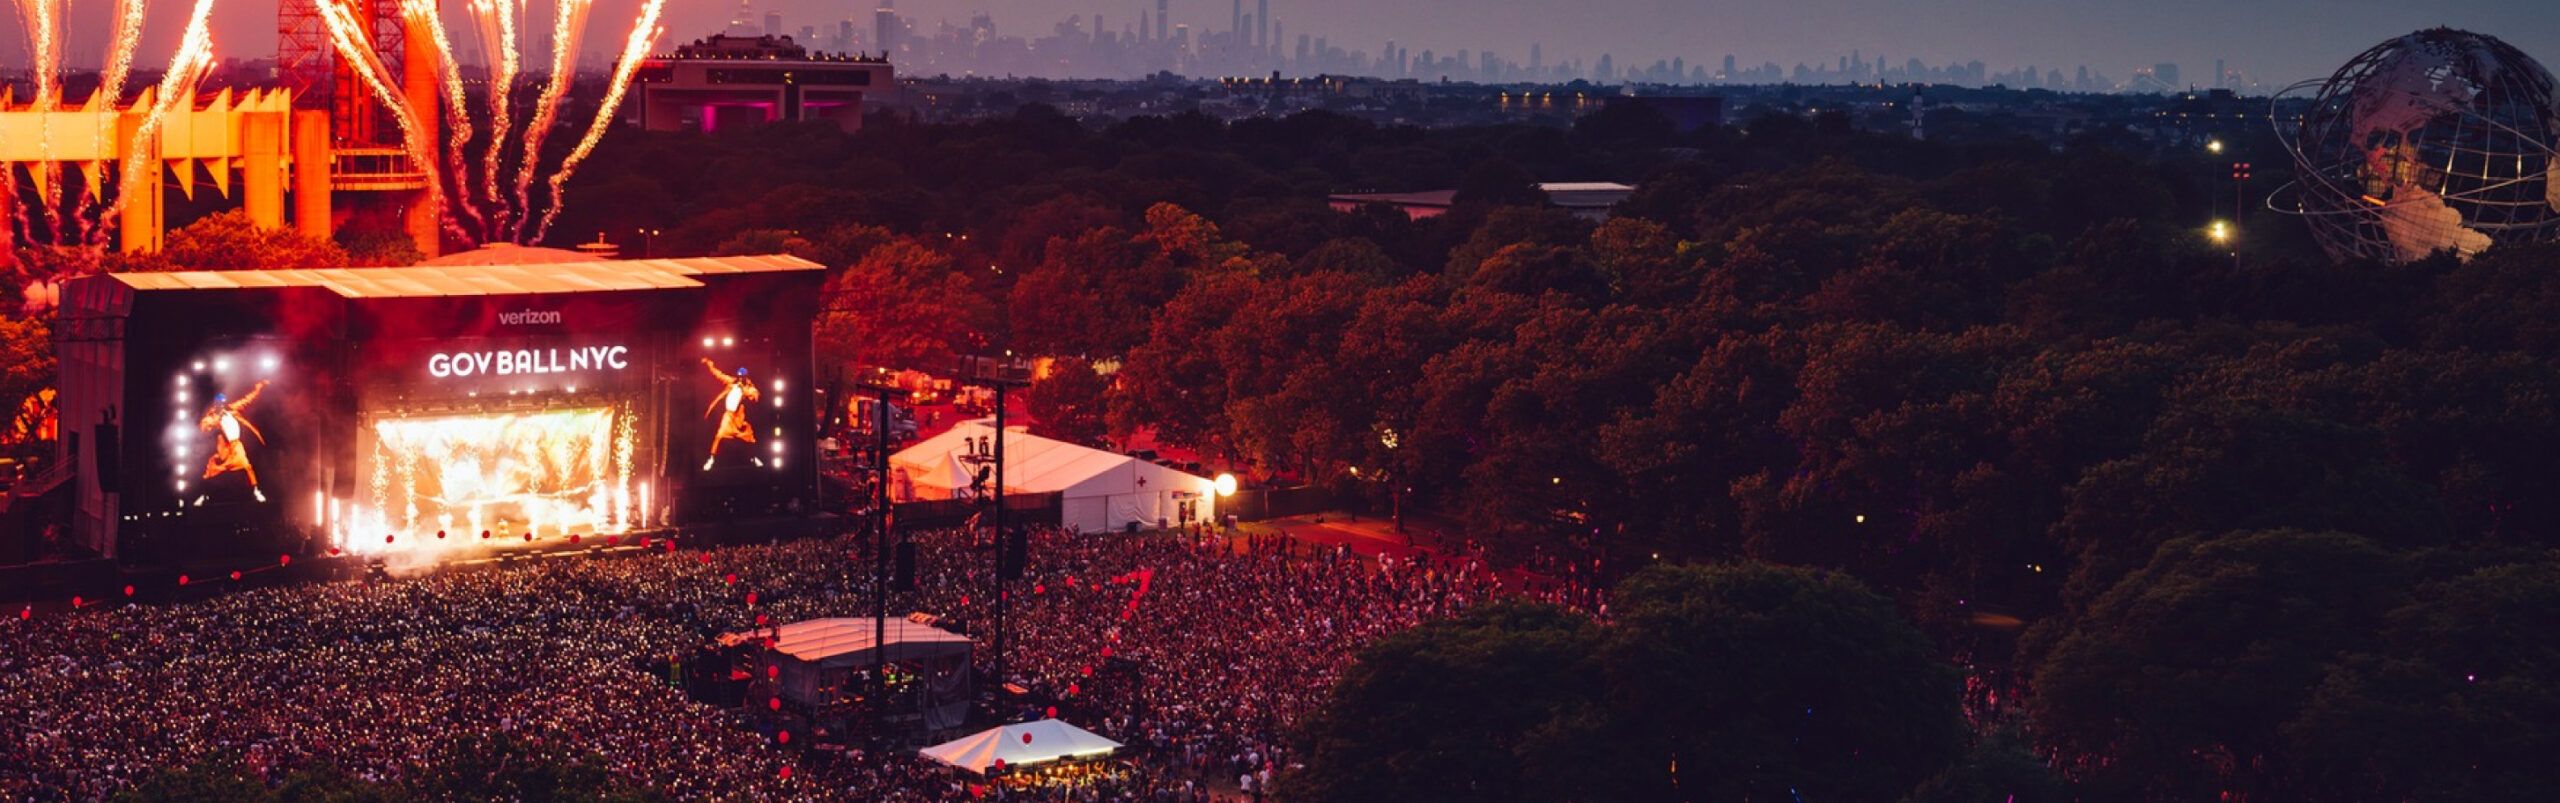 The Governors Ball header